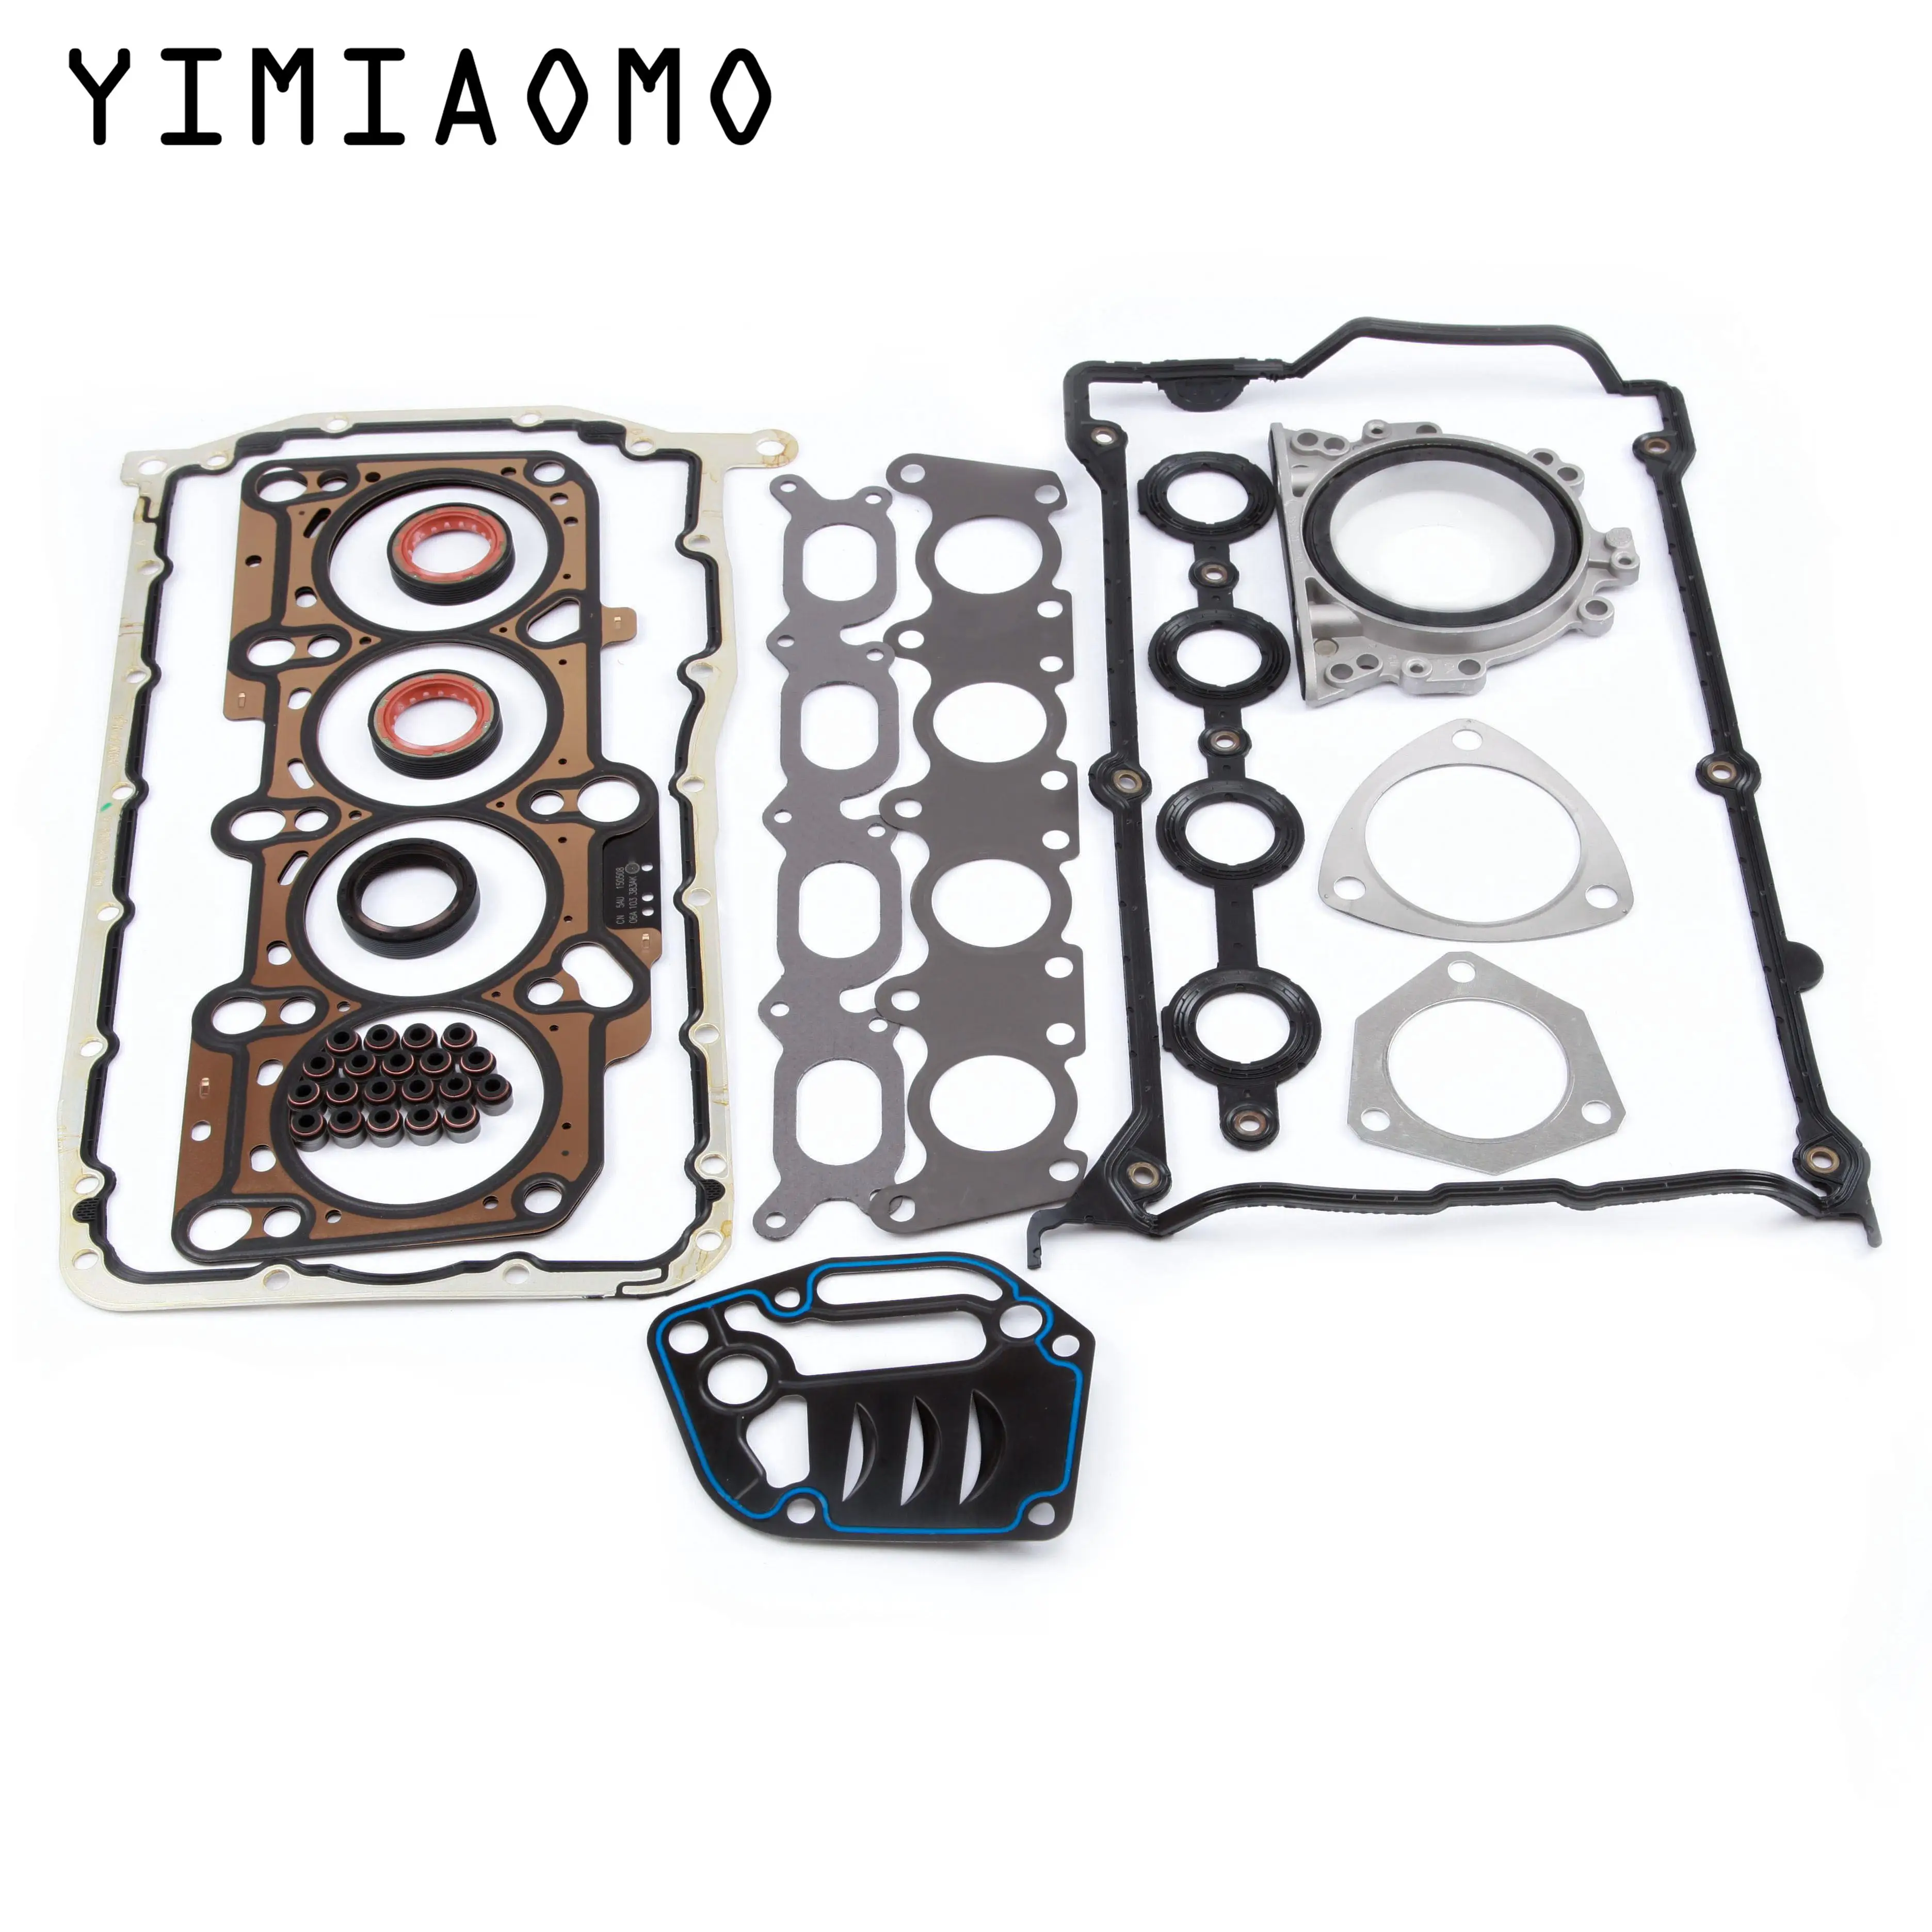 

For VW Passat Golf GTI Audi A3 A4 A6 TT 1.8T Engine Overhaul Kit 19MM Pistons Connecting Rod Bearing Cylinder Head Gasket Set